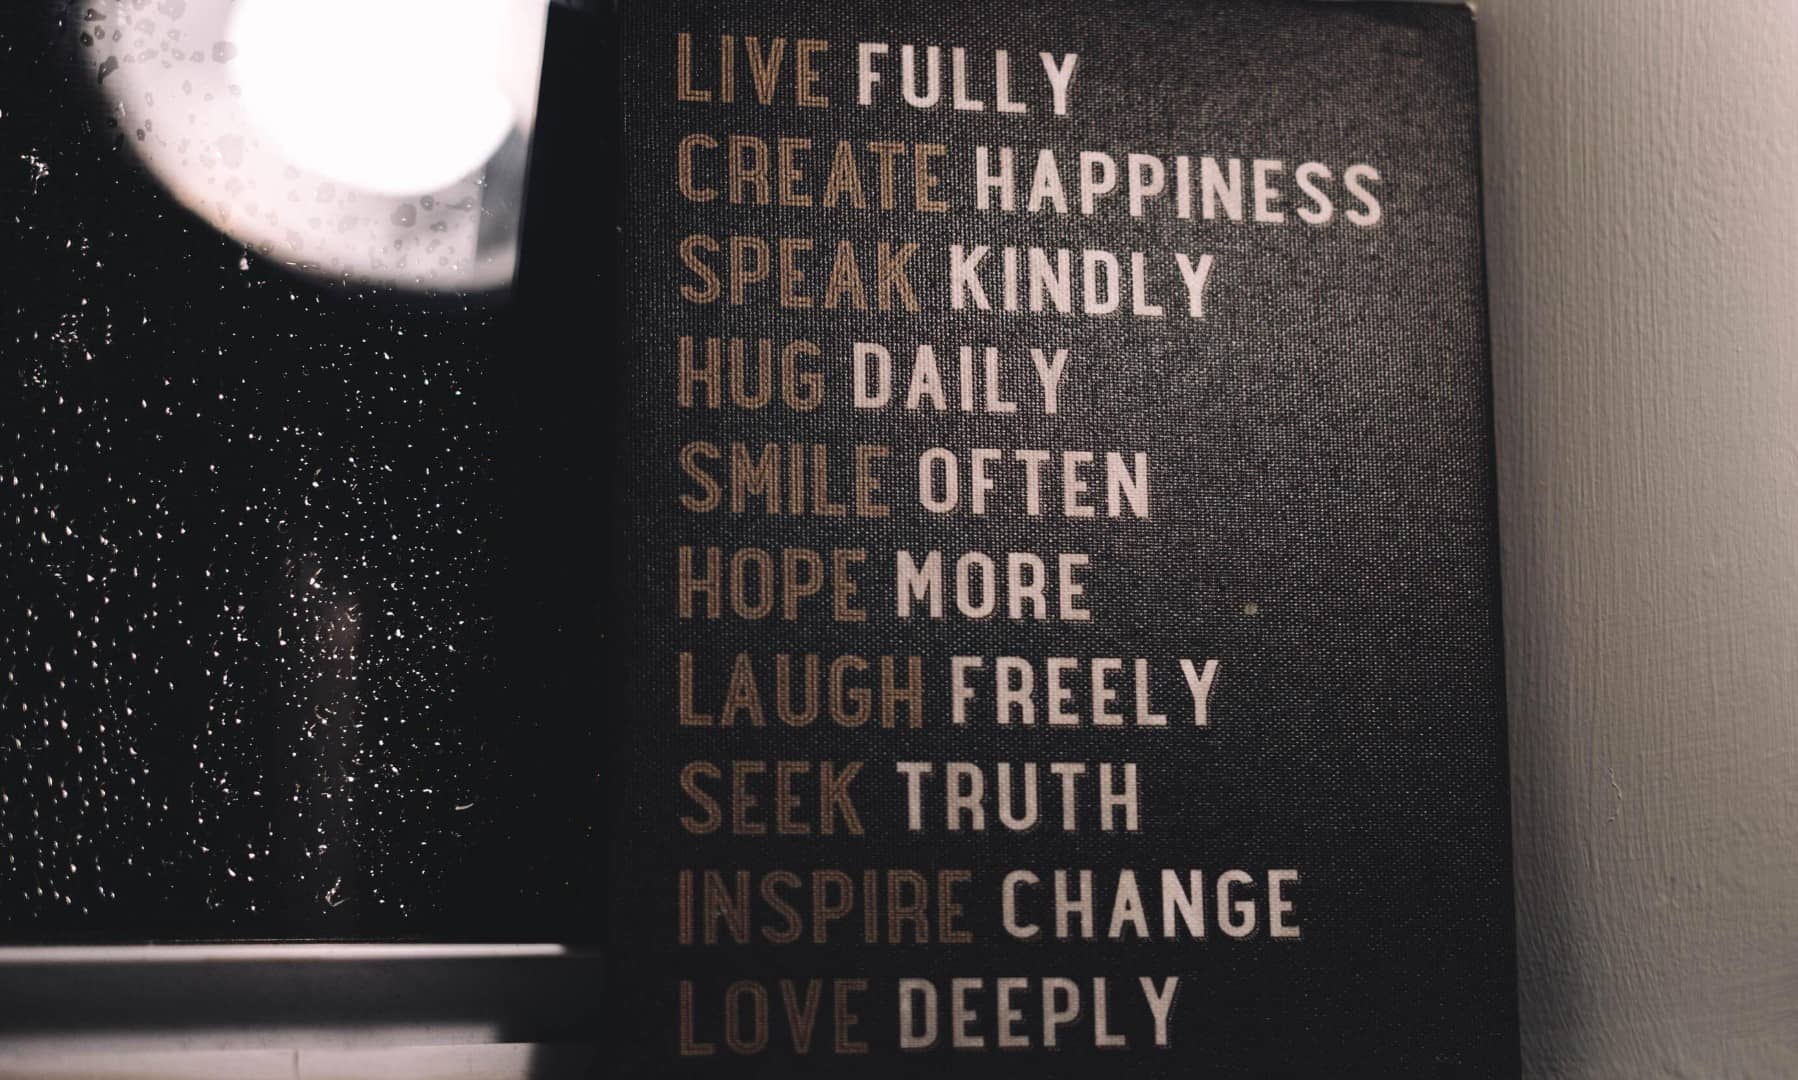 65 Live Laugh Love Quotes To Live Your Best Life